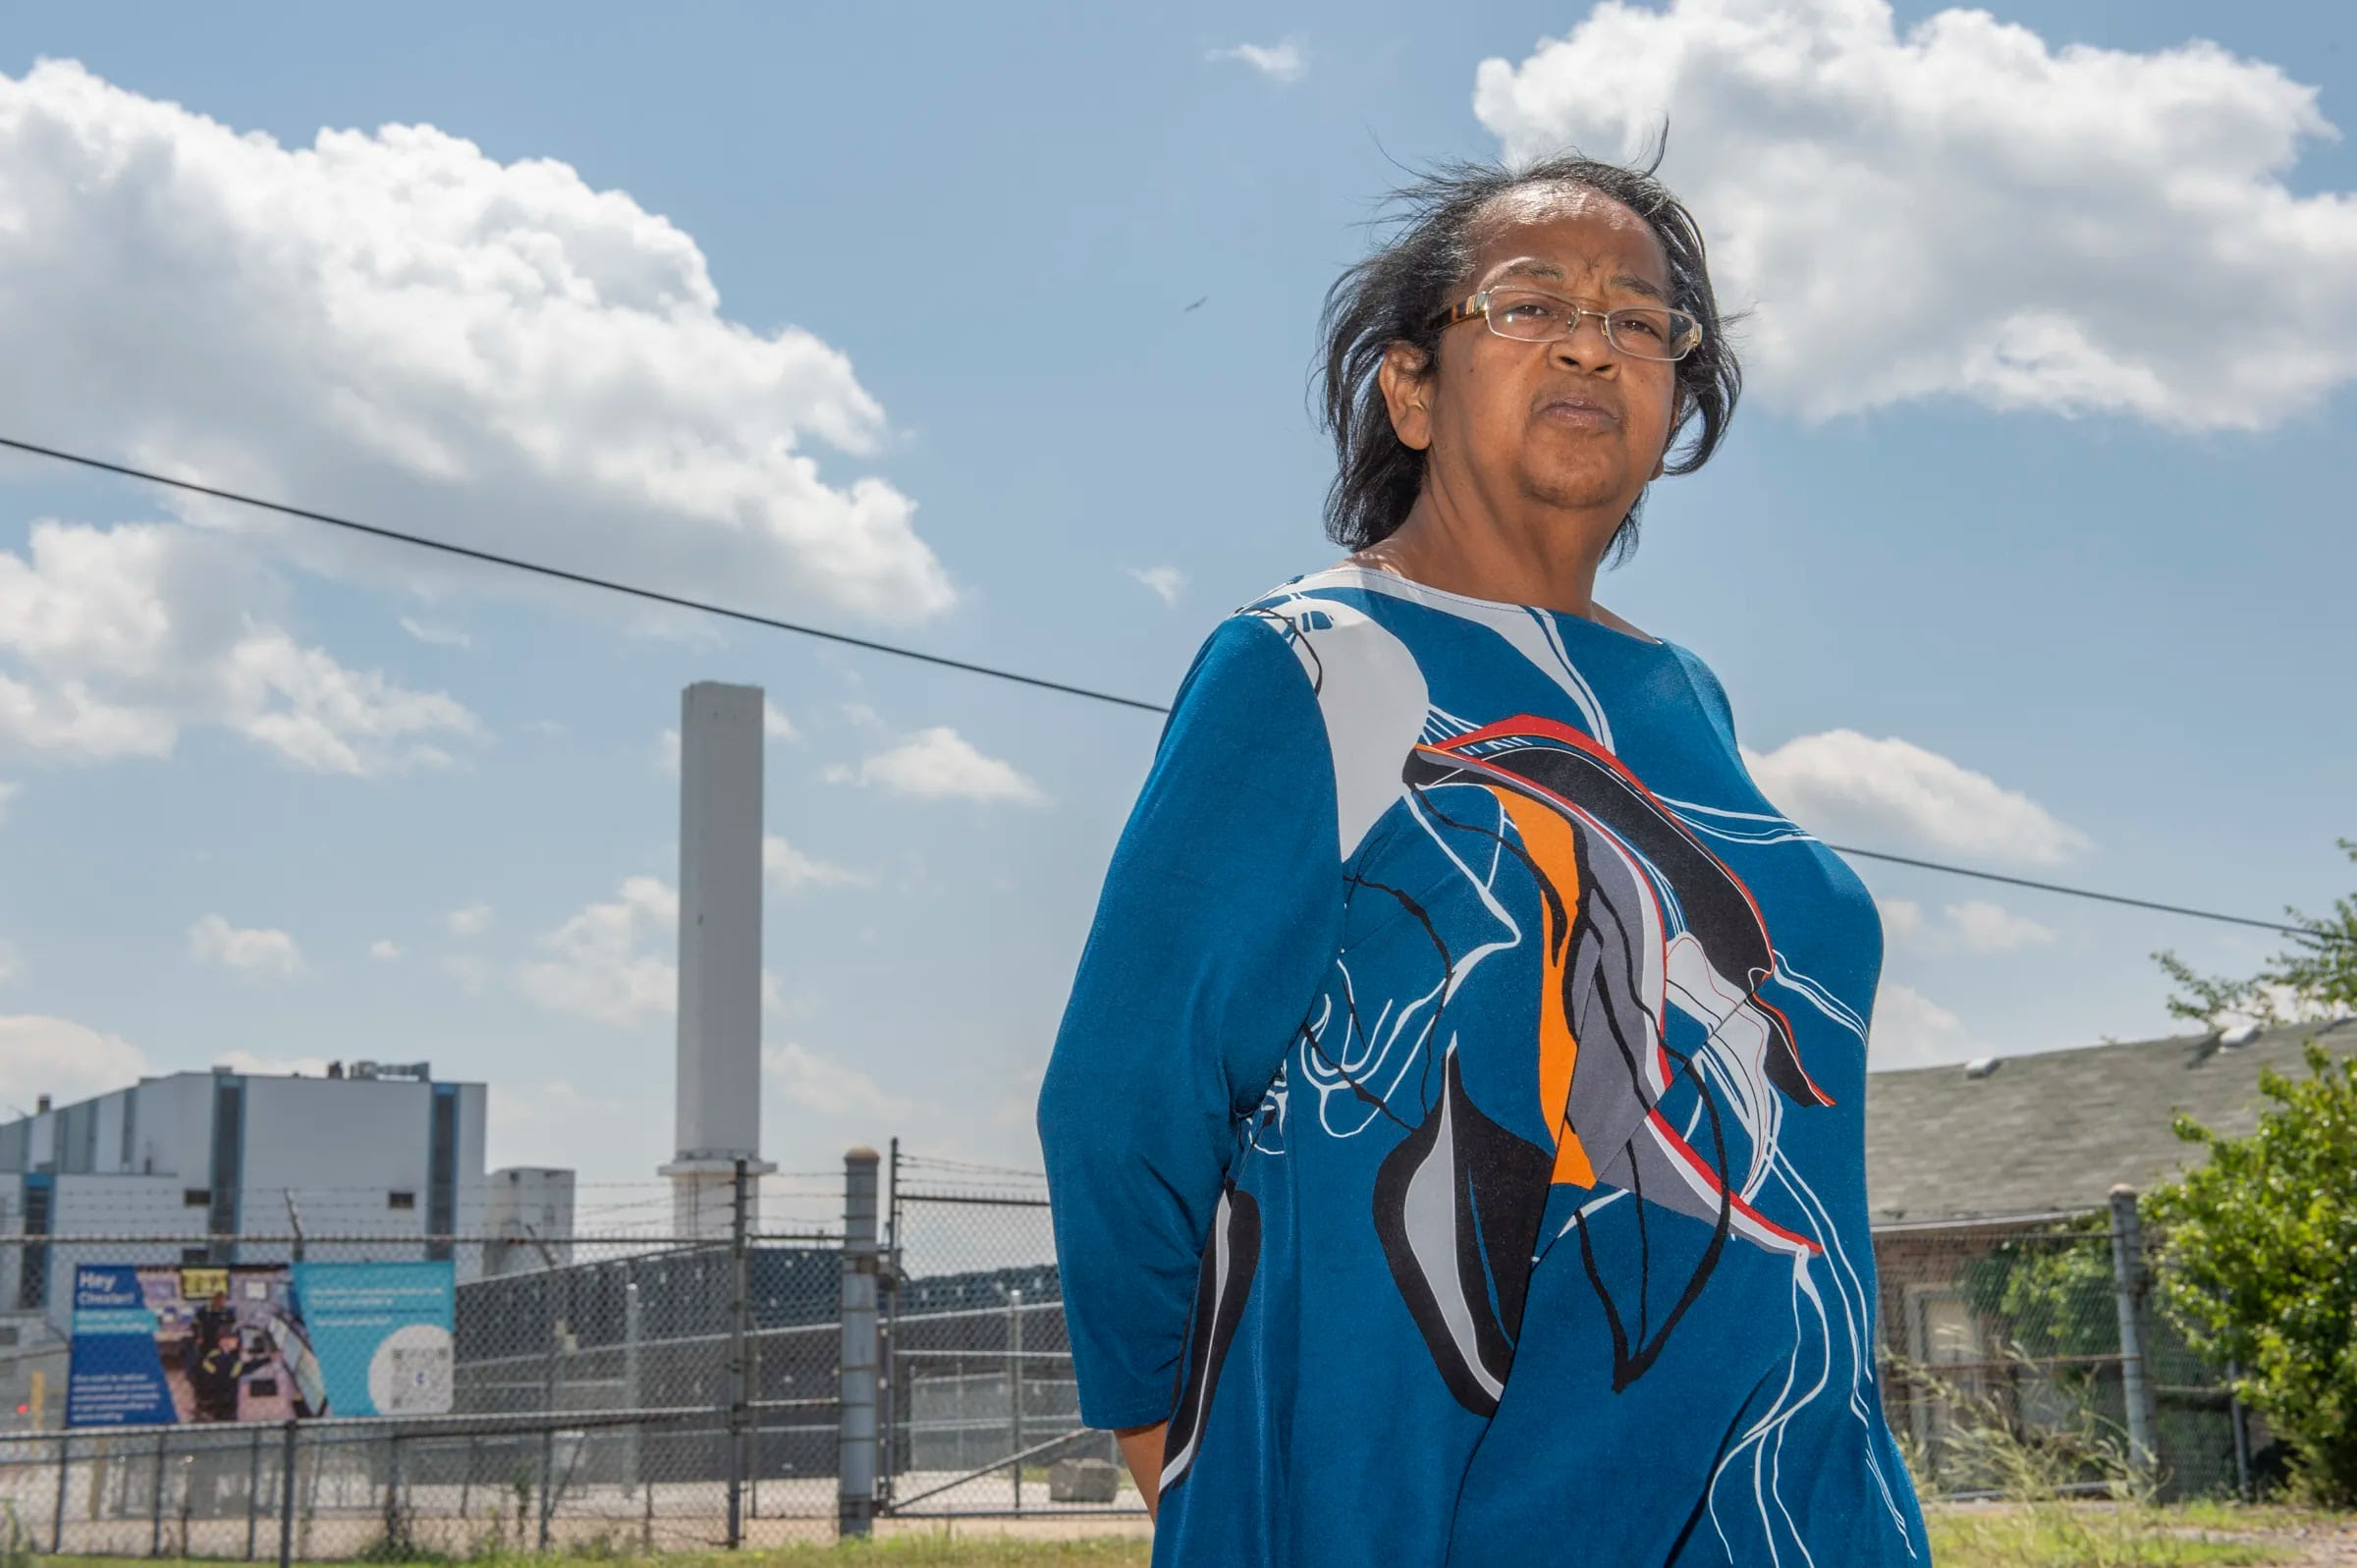 Zulene Mayfield, an environmental justice advocate in Chester, said her organization would oppose an LNG plant on the city's waterfront.